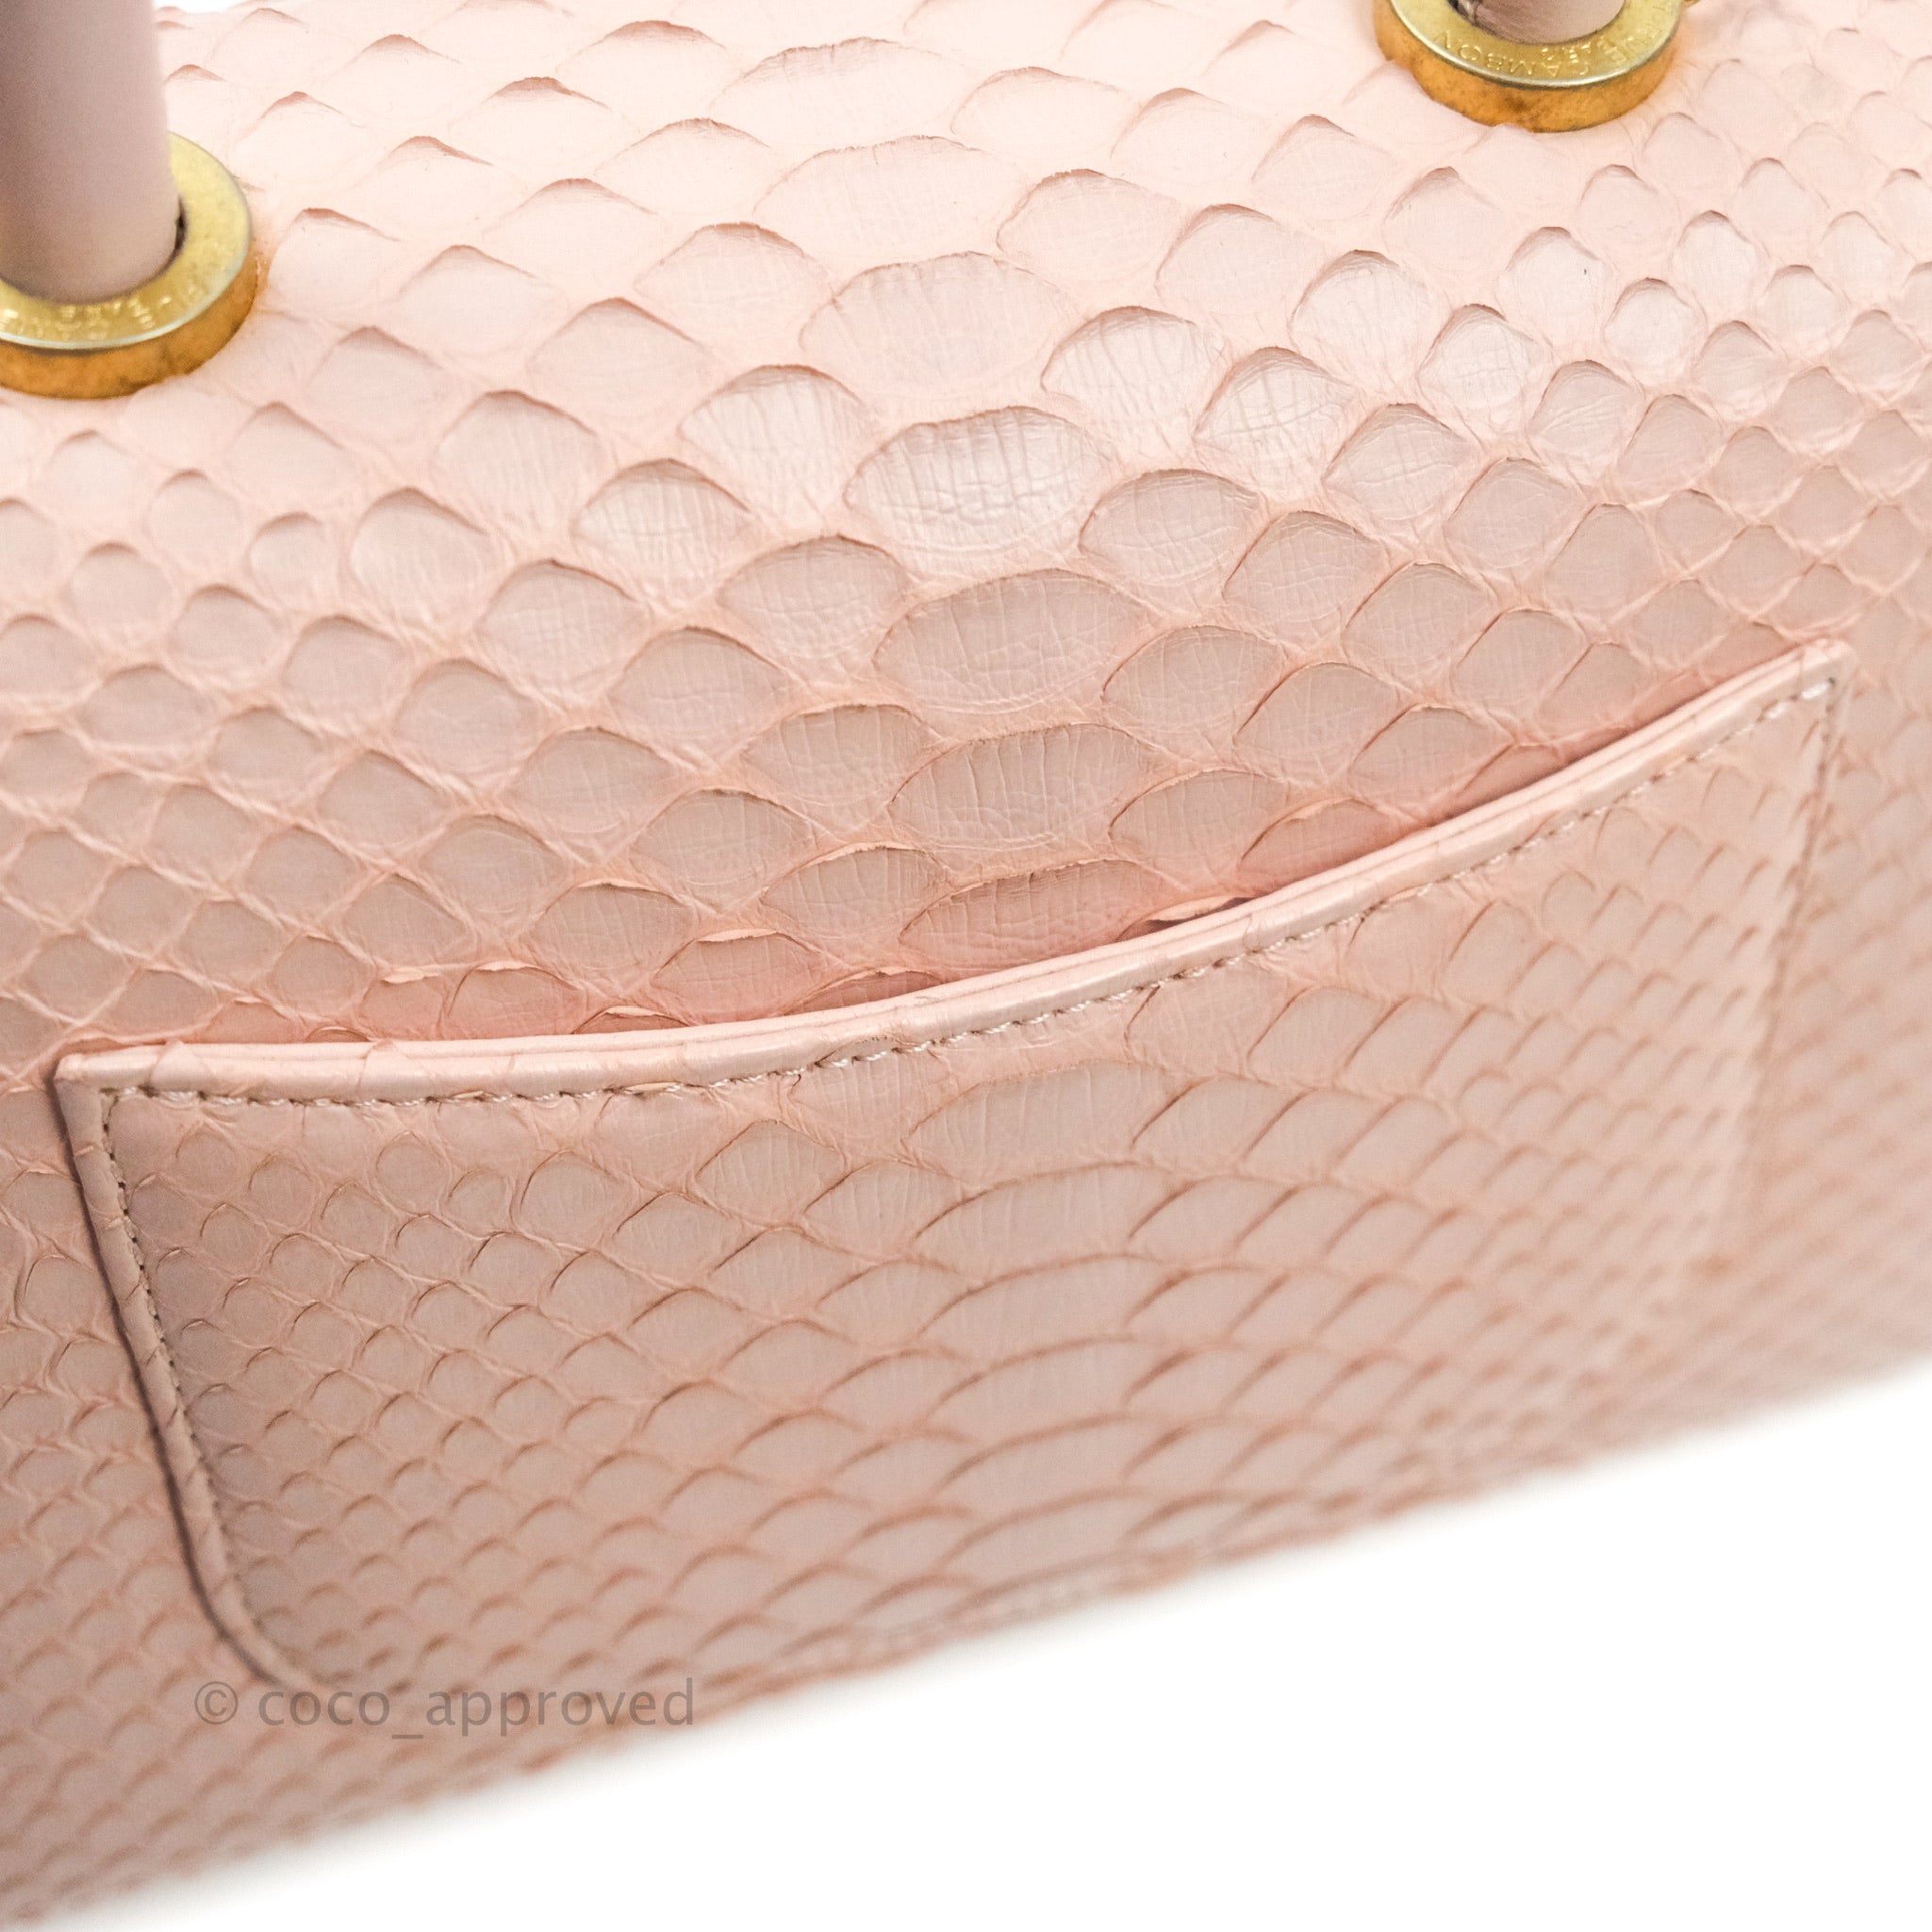 Chanel Bright Pink Iridescent Quilted Caviar Mini Coco Handle by Ann's Fabulous Finds